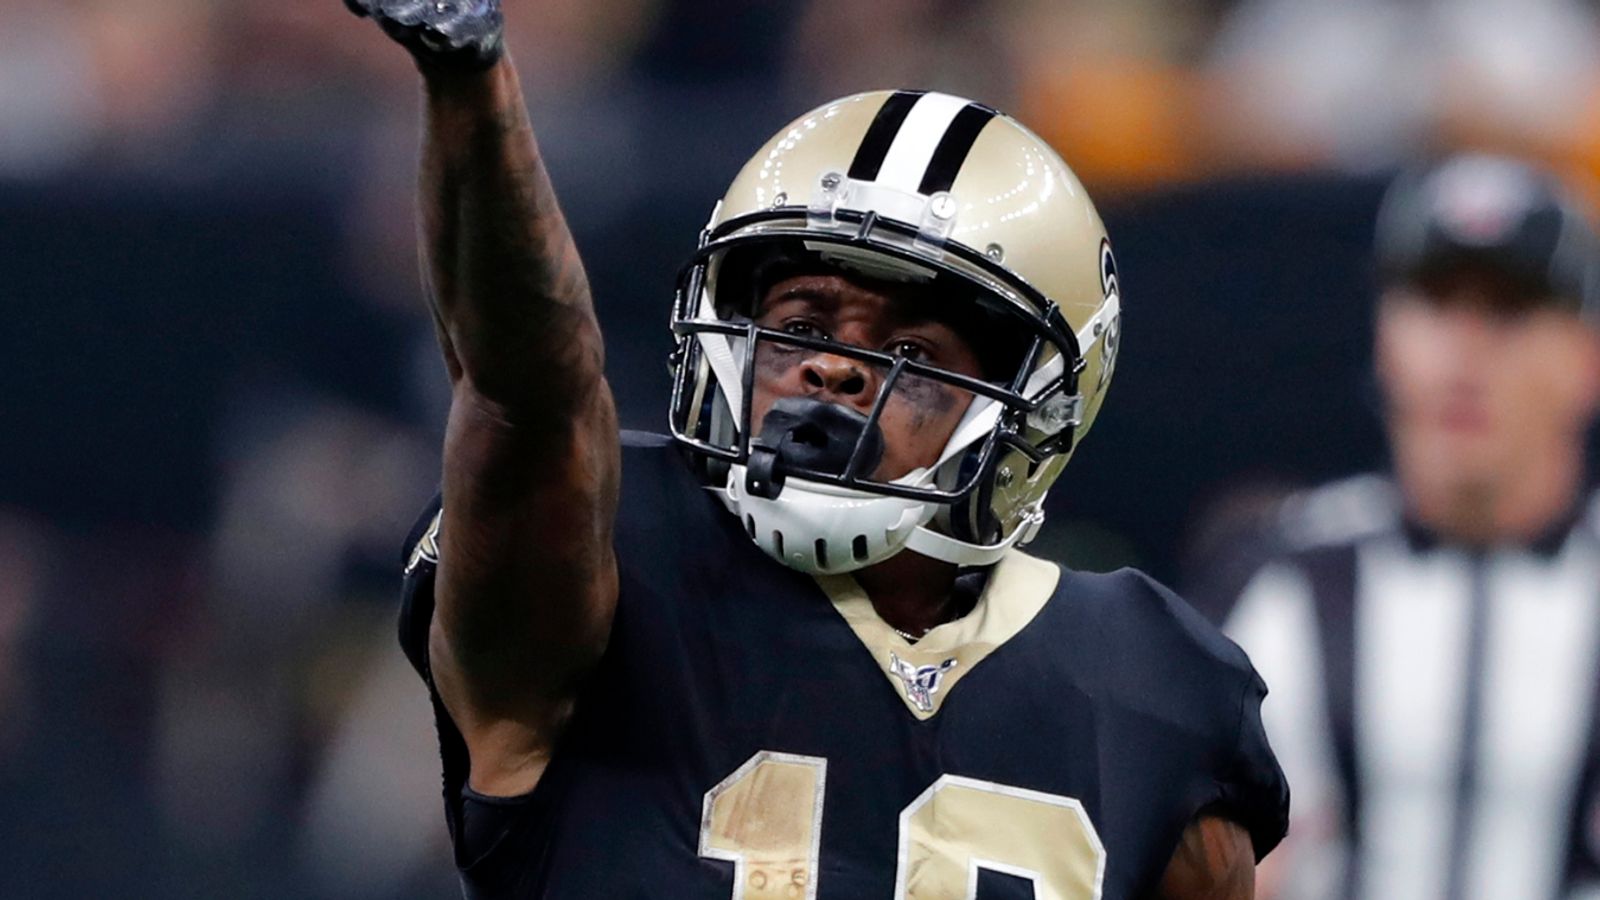 Ted Ginn Jr announces retirement from NFL after 14 years